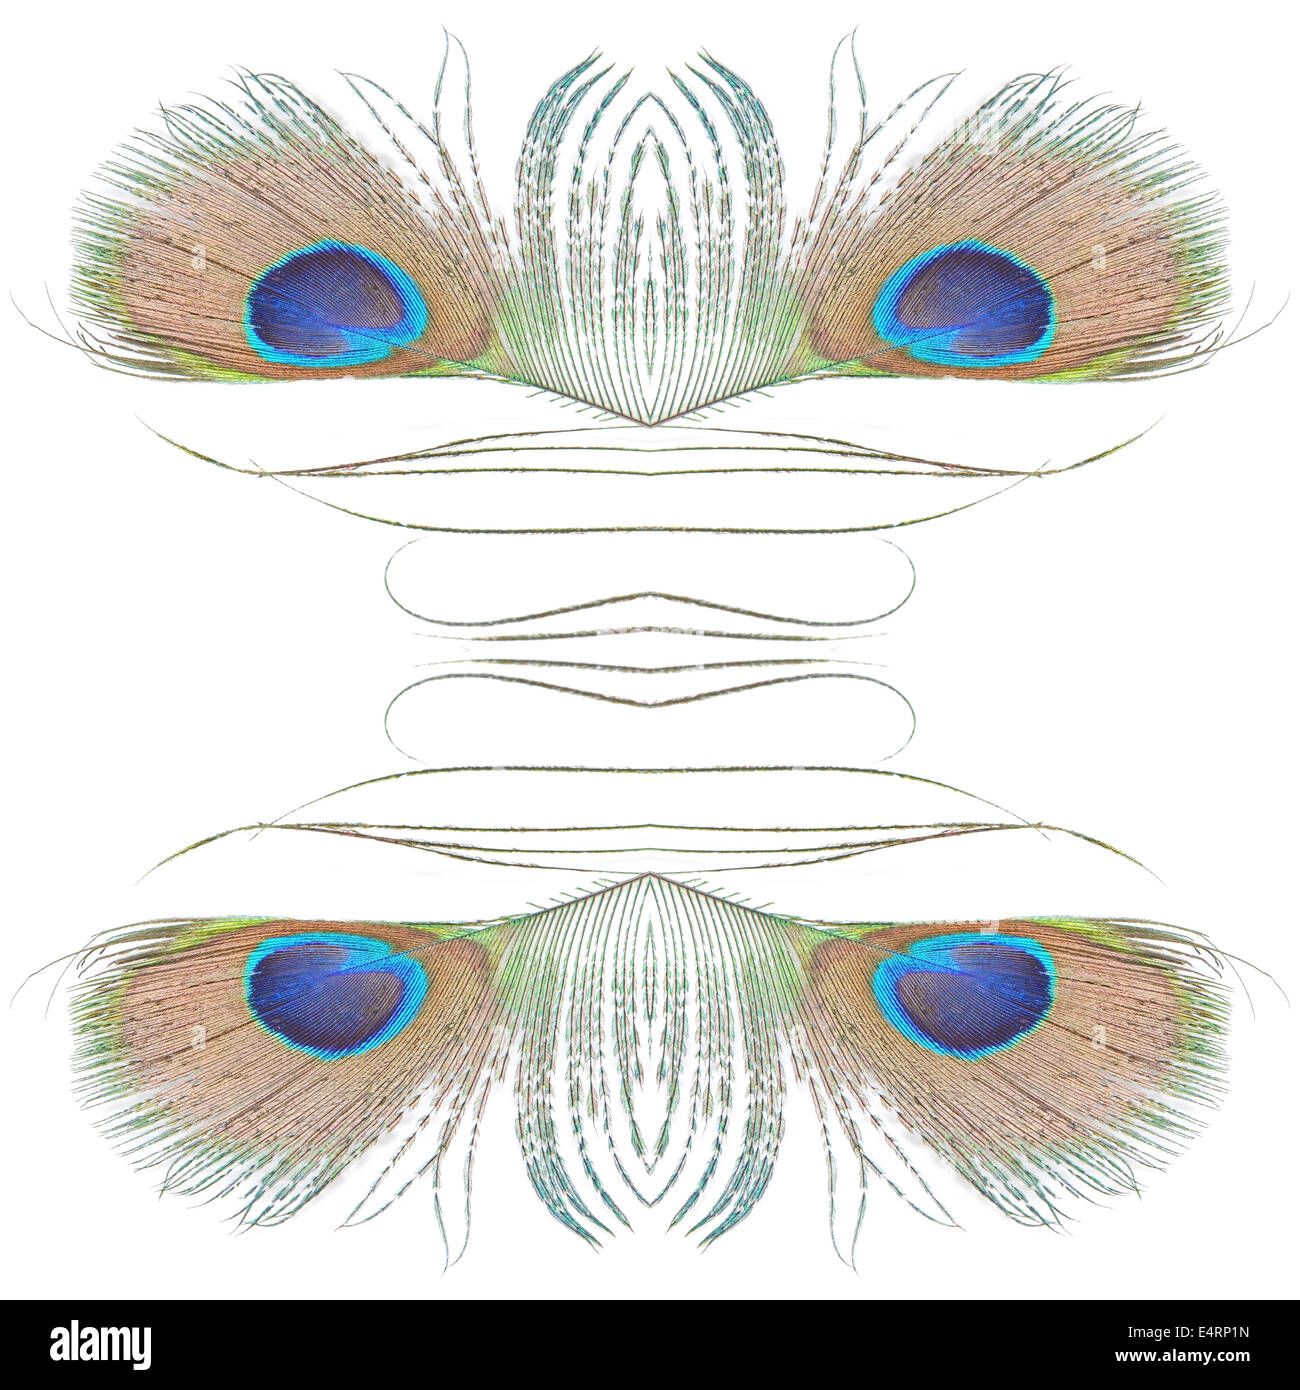 Beau vert Peacock feathers pattern abstract, isolé sur fond blanc Banque D'Images